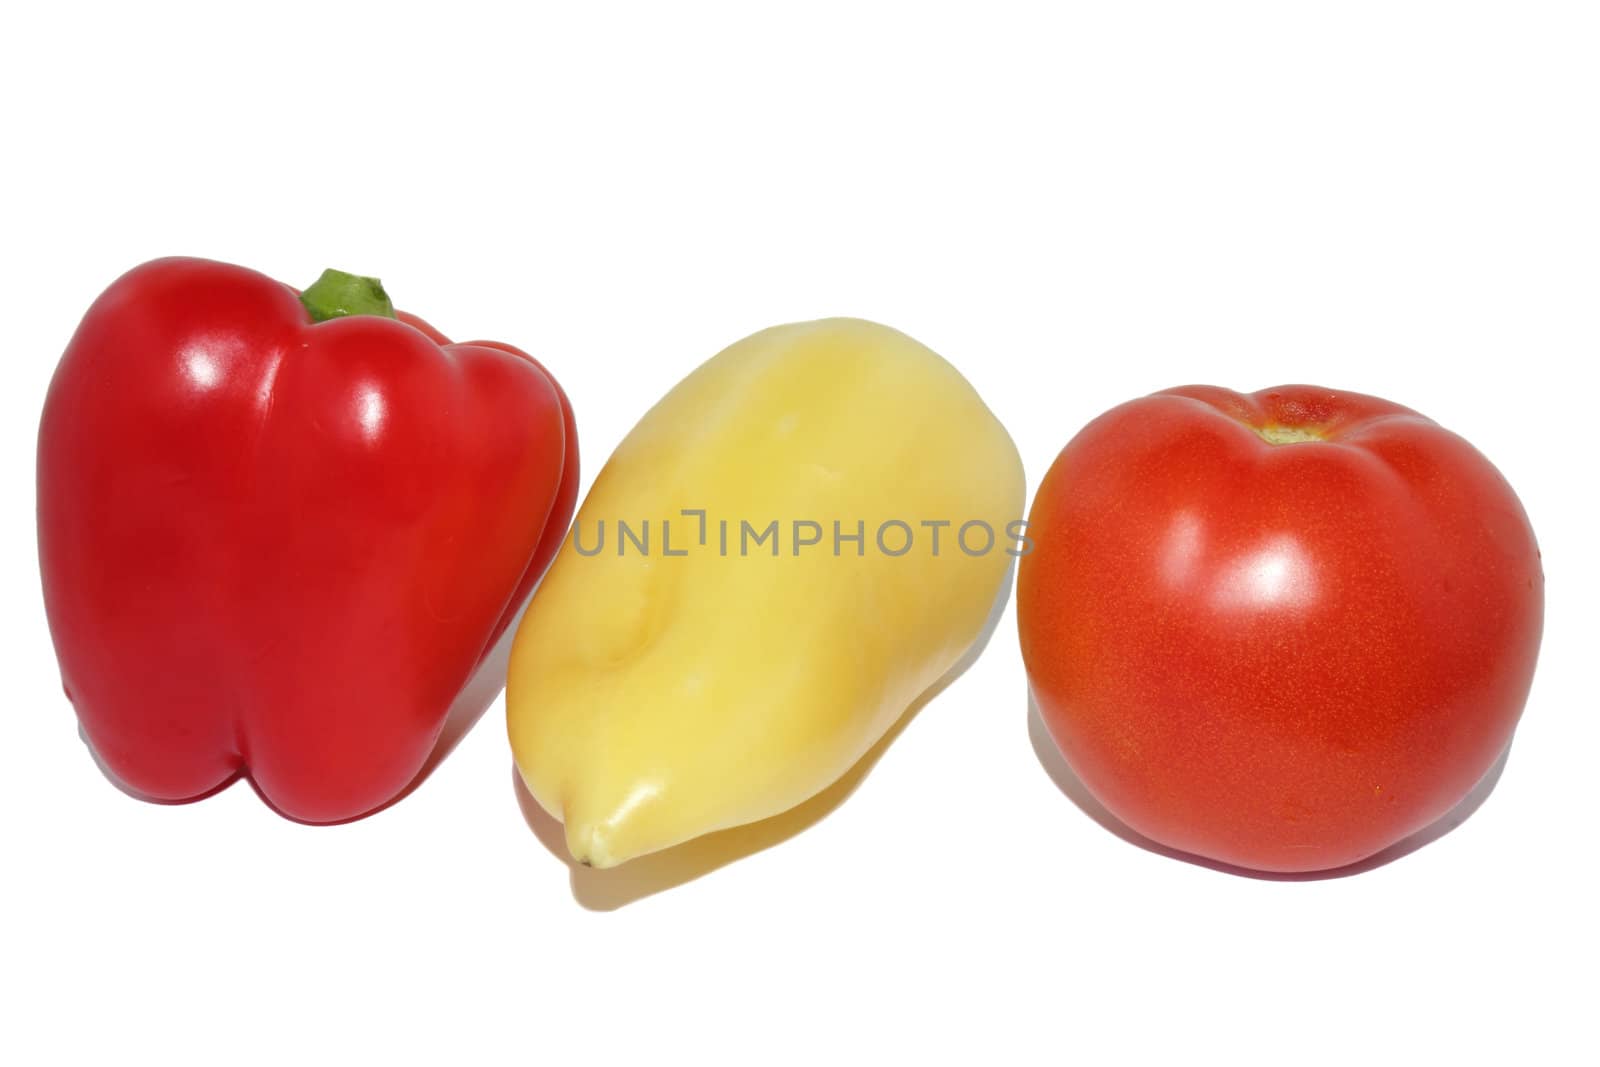 Red sweet pepper, yellow sweet pepper and red tomato on a white background